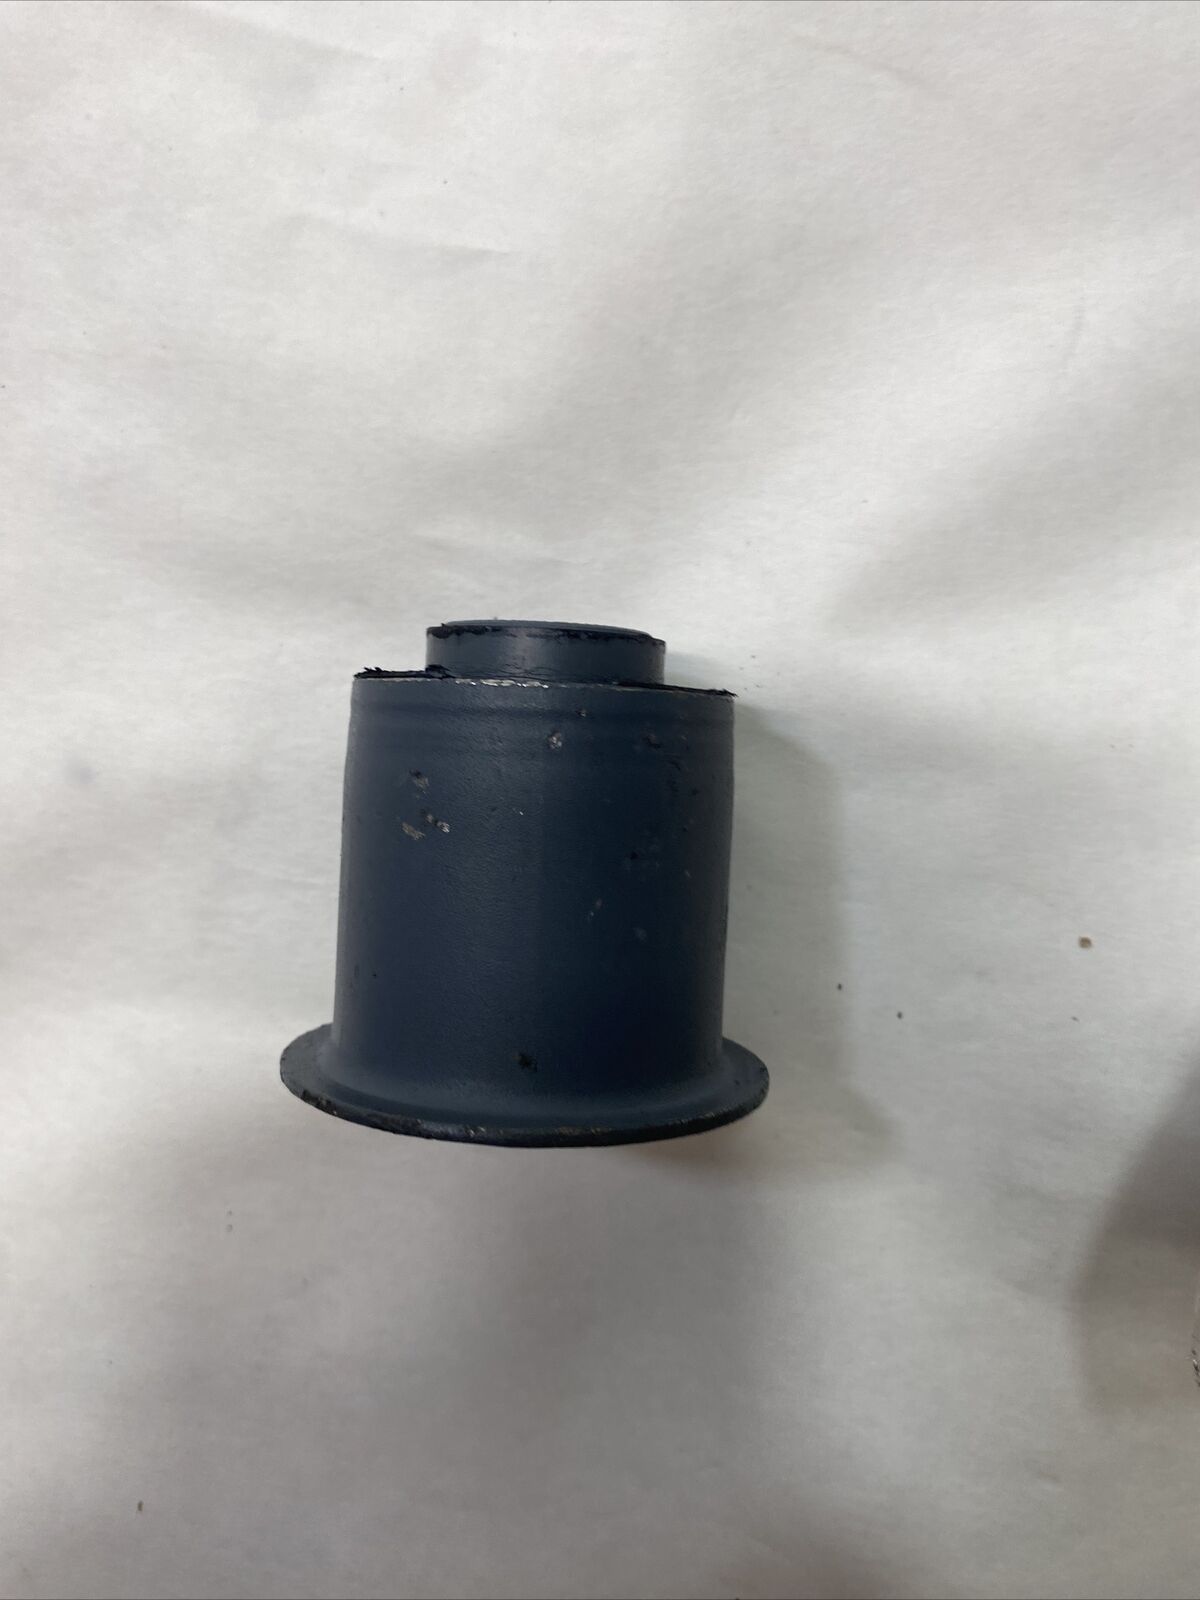 New OEM Genuine Ford 21-23 Front Differential Carrier Mount Bushing NL3Z3A443A